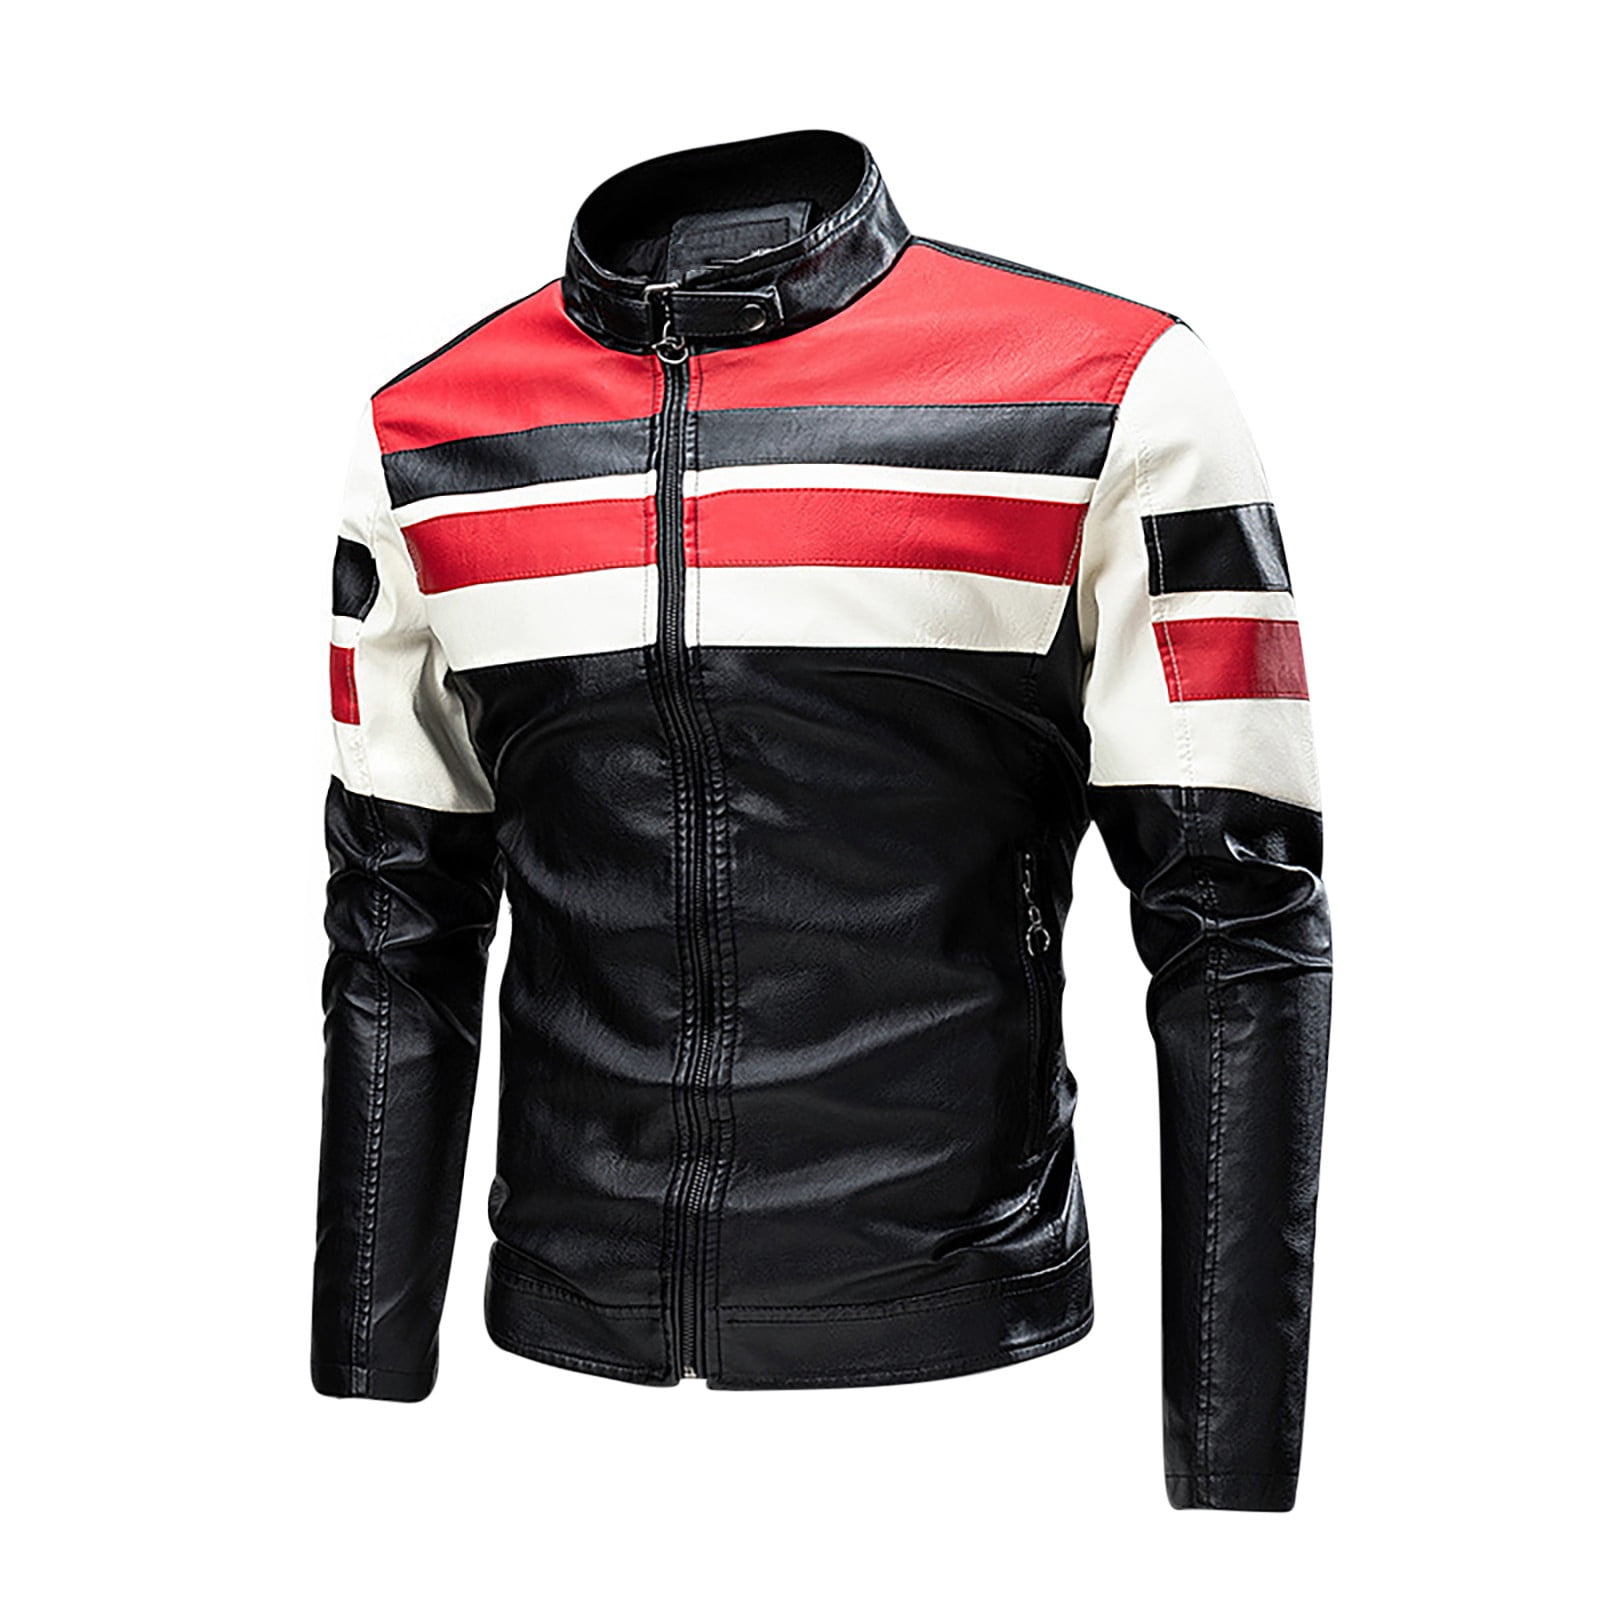 Motorcycle Jackets On Sale - Discount Motorcycle Jackets - RevZilla